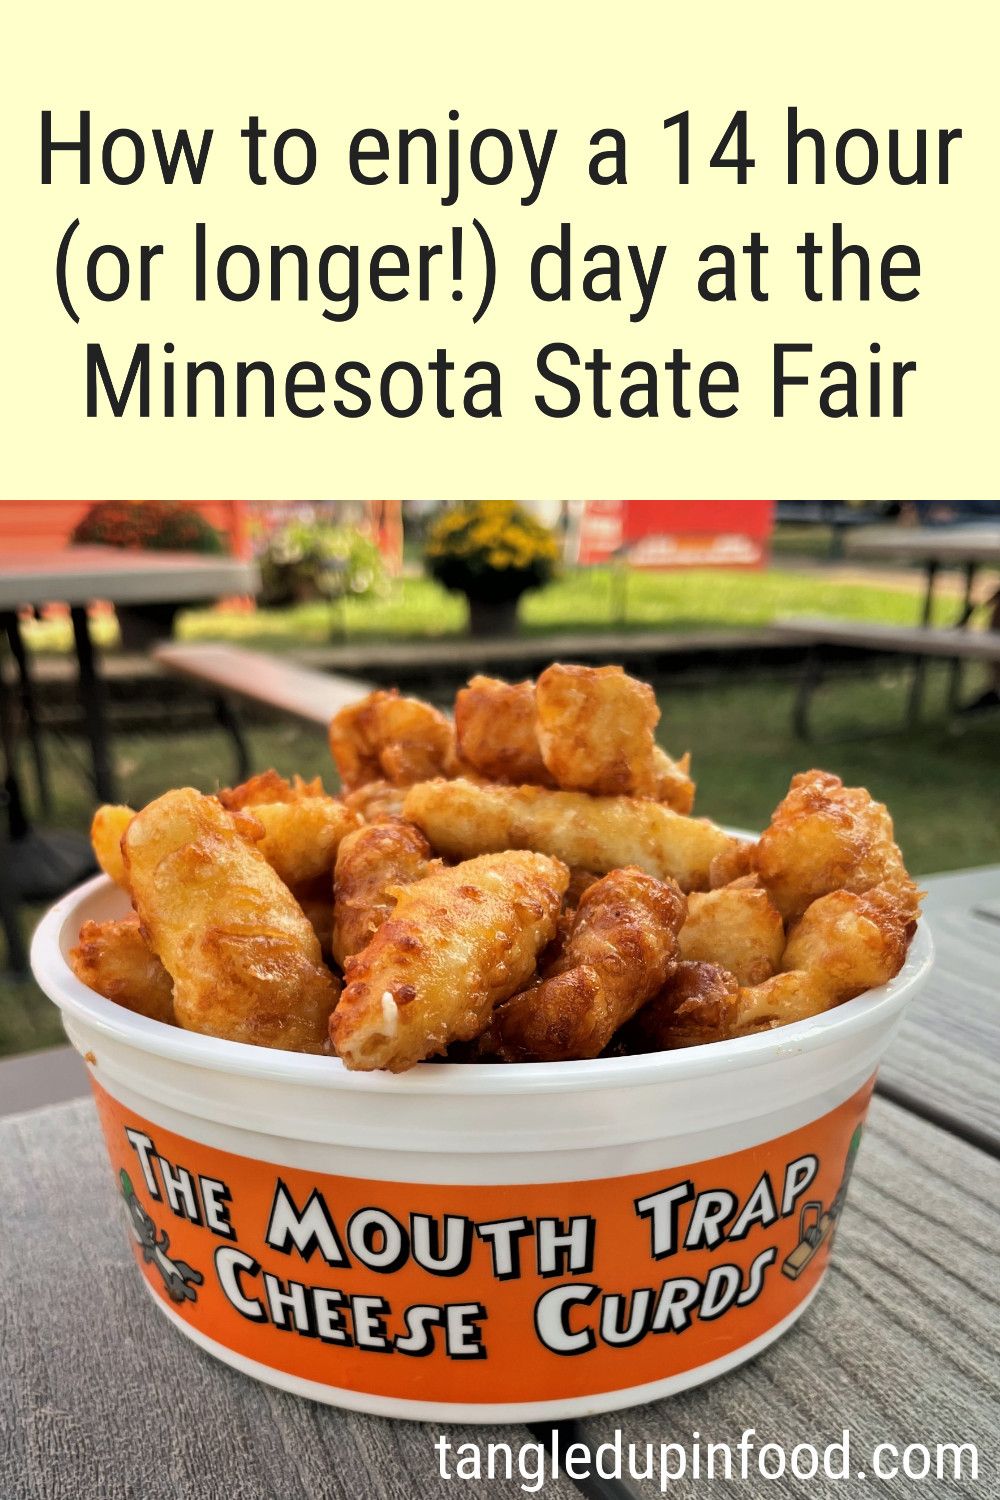 Photo of bucket of deep-fried cheese curds and text reading "How to enjoy a 14 hour (or longer!) day at the Minnesota State Fair"